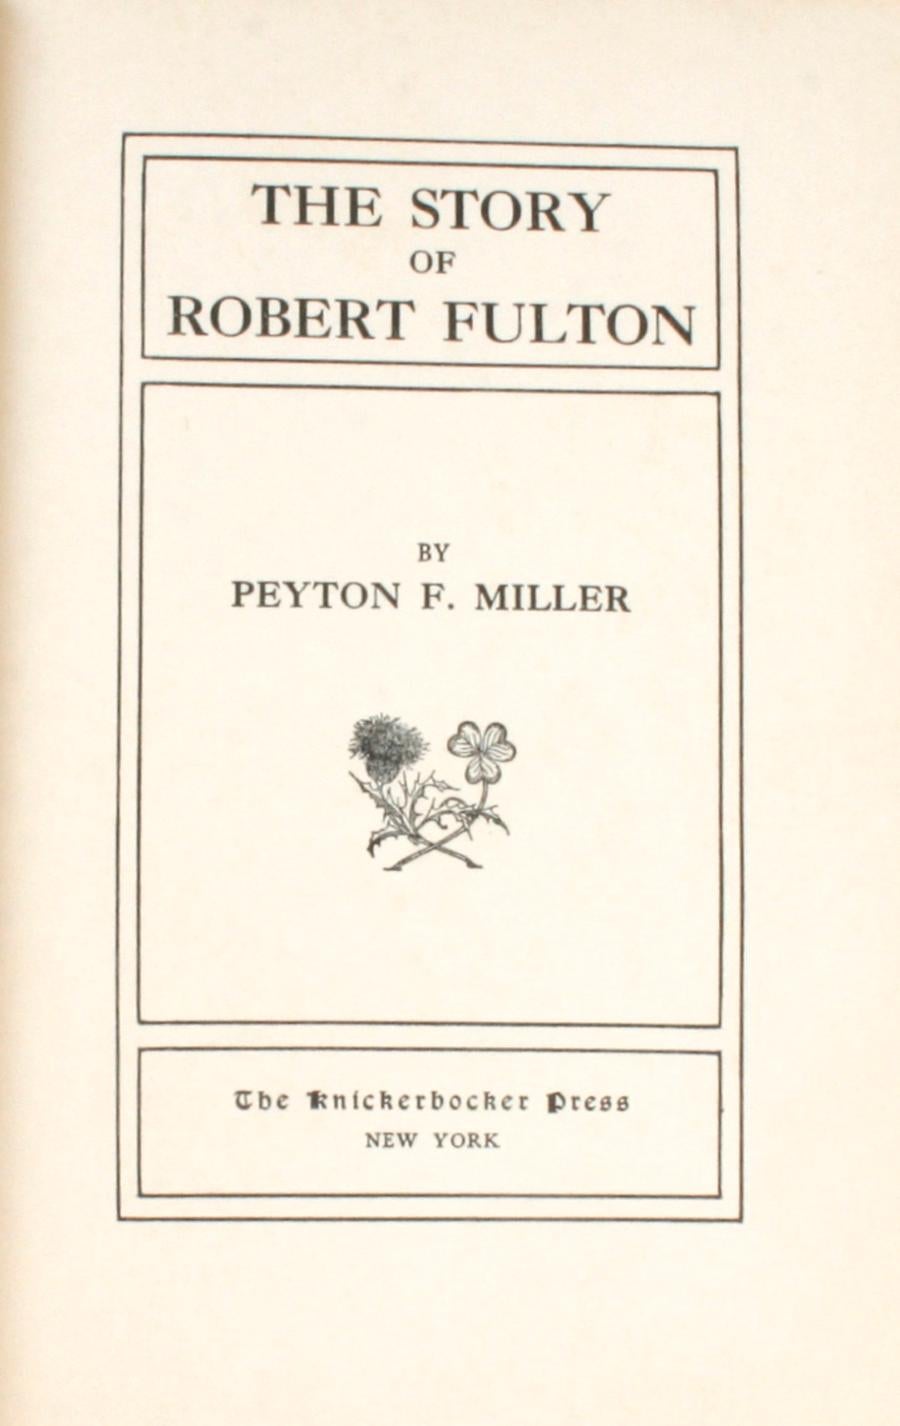 American The Story of Robert Fulton by Peyton F. Miller, 1st Edition